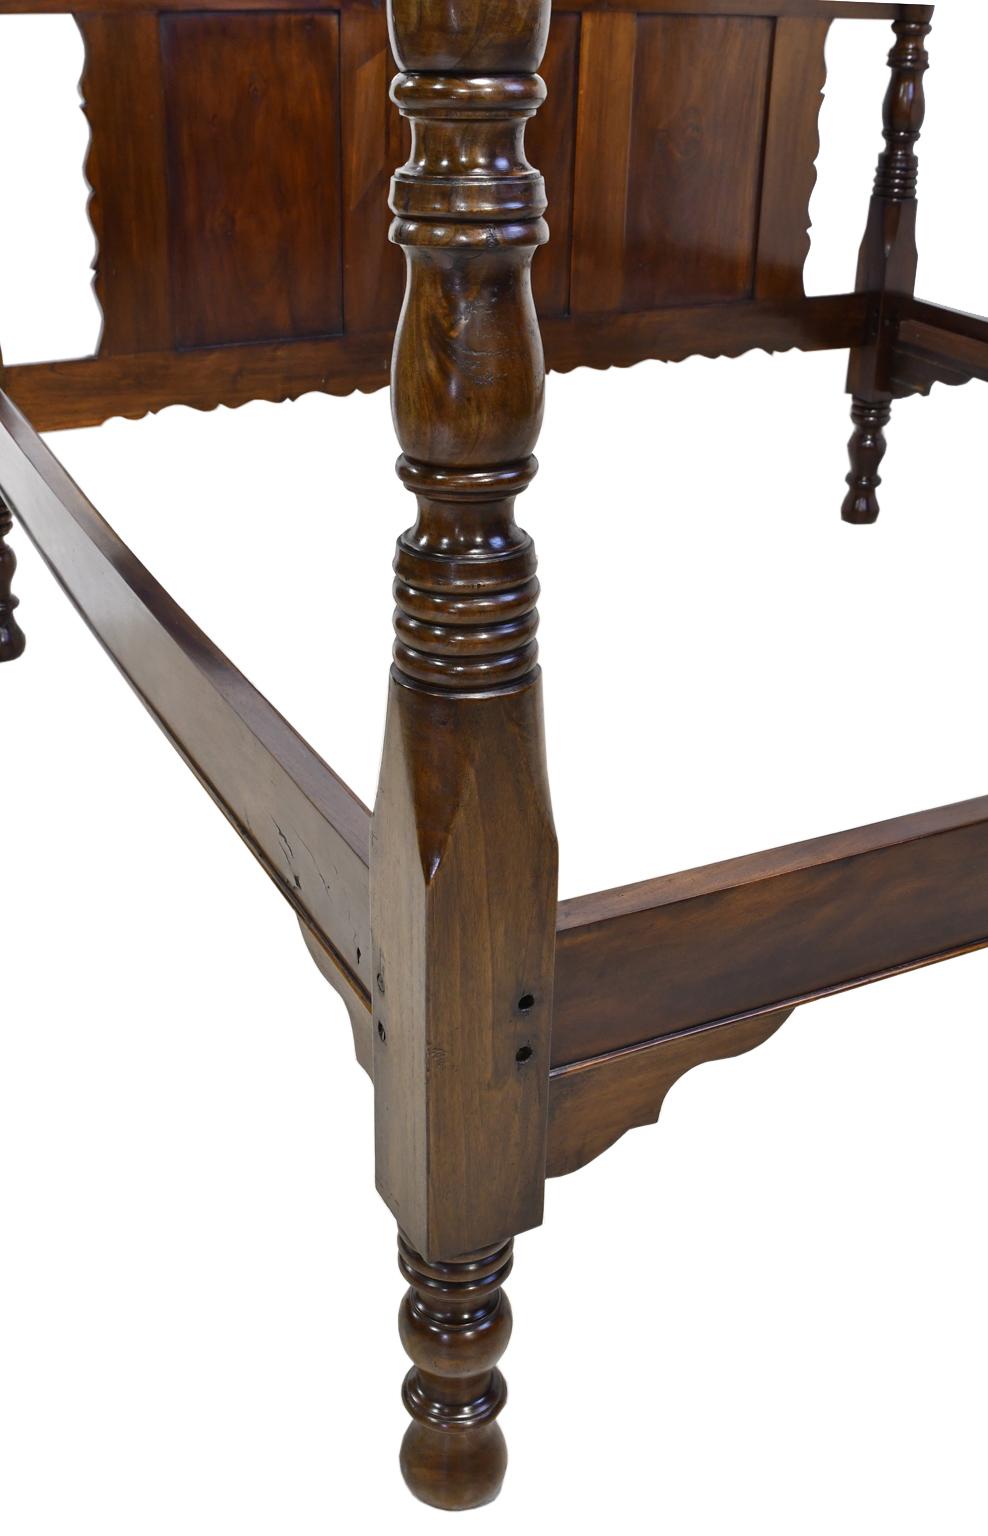 Hand-Carved French Colonial Four-Poster King Bed in West Indies Walnut, Haiti, circa 1830